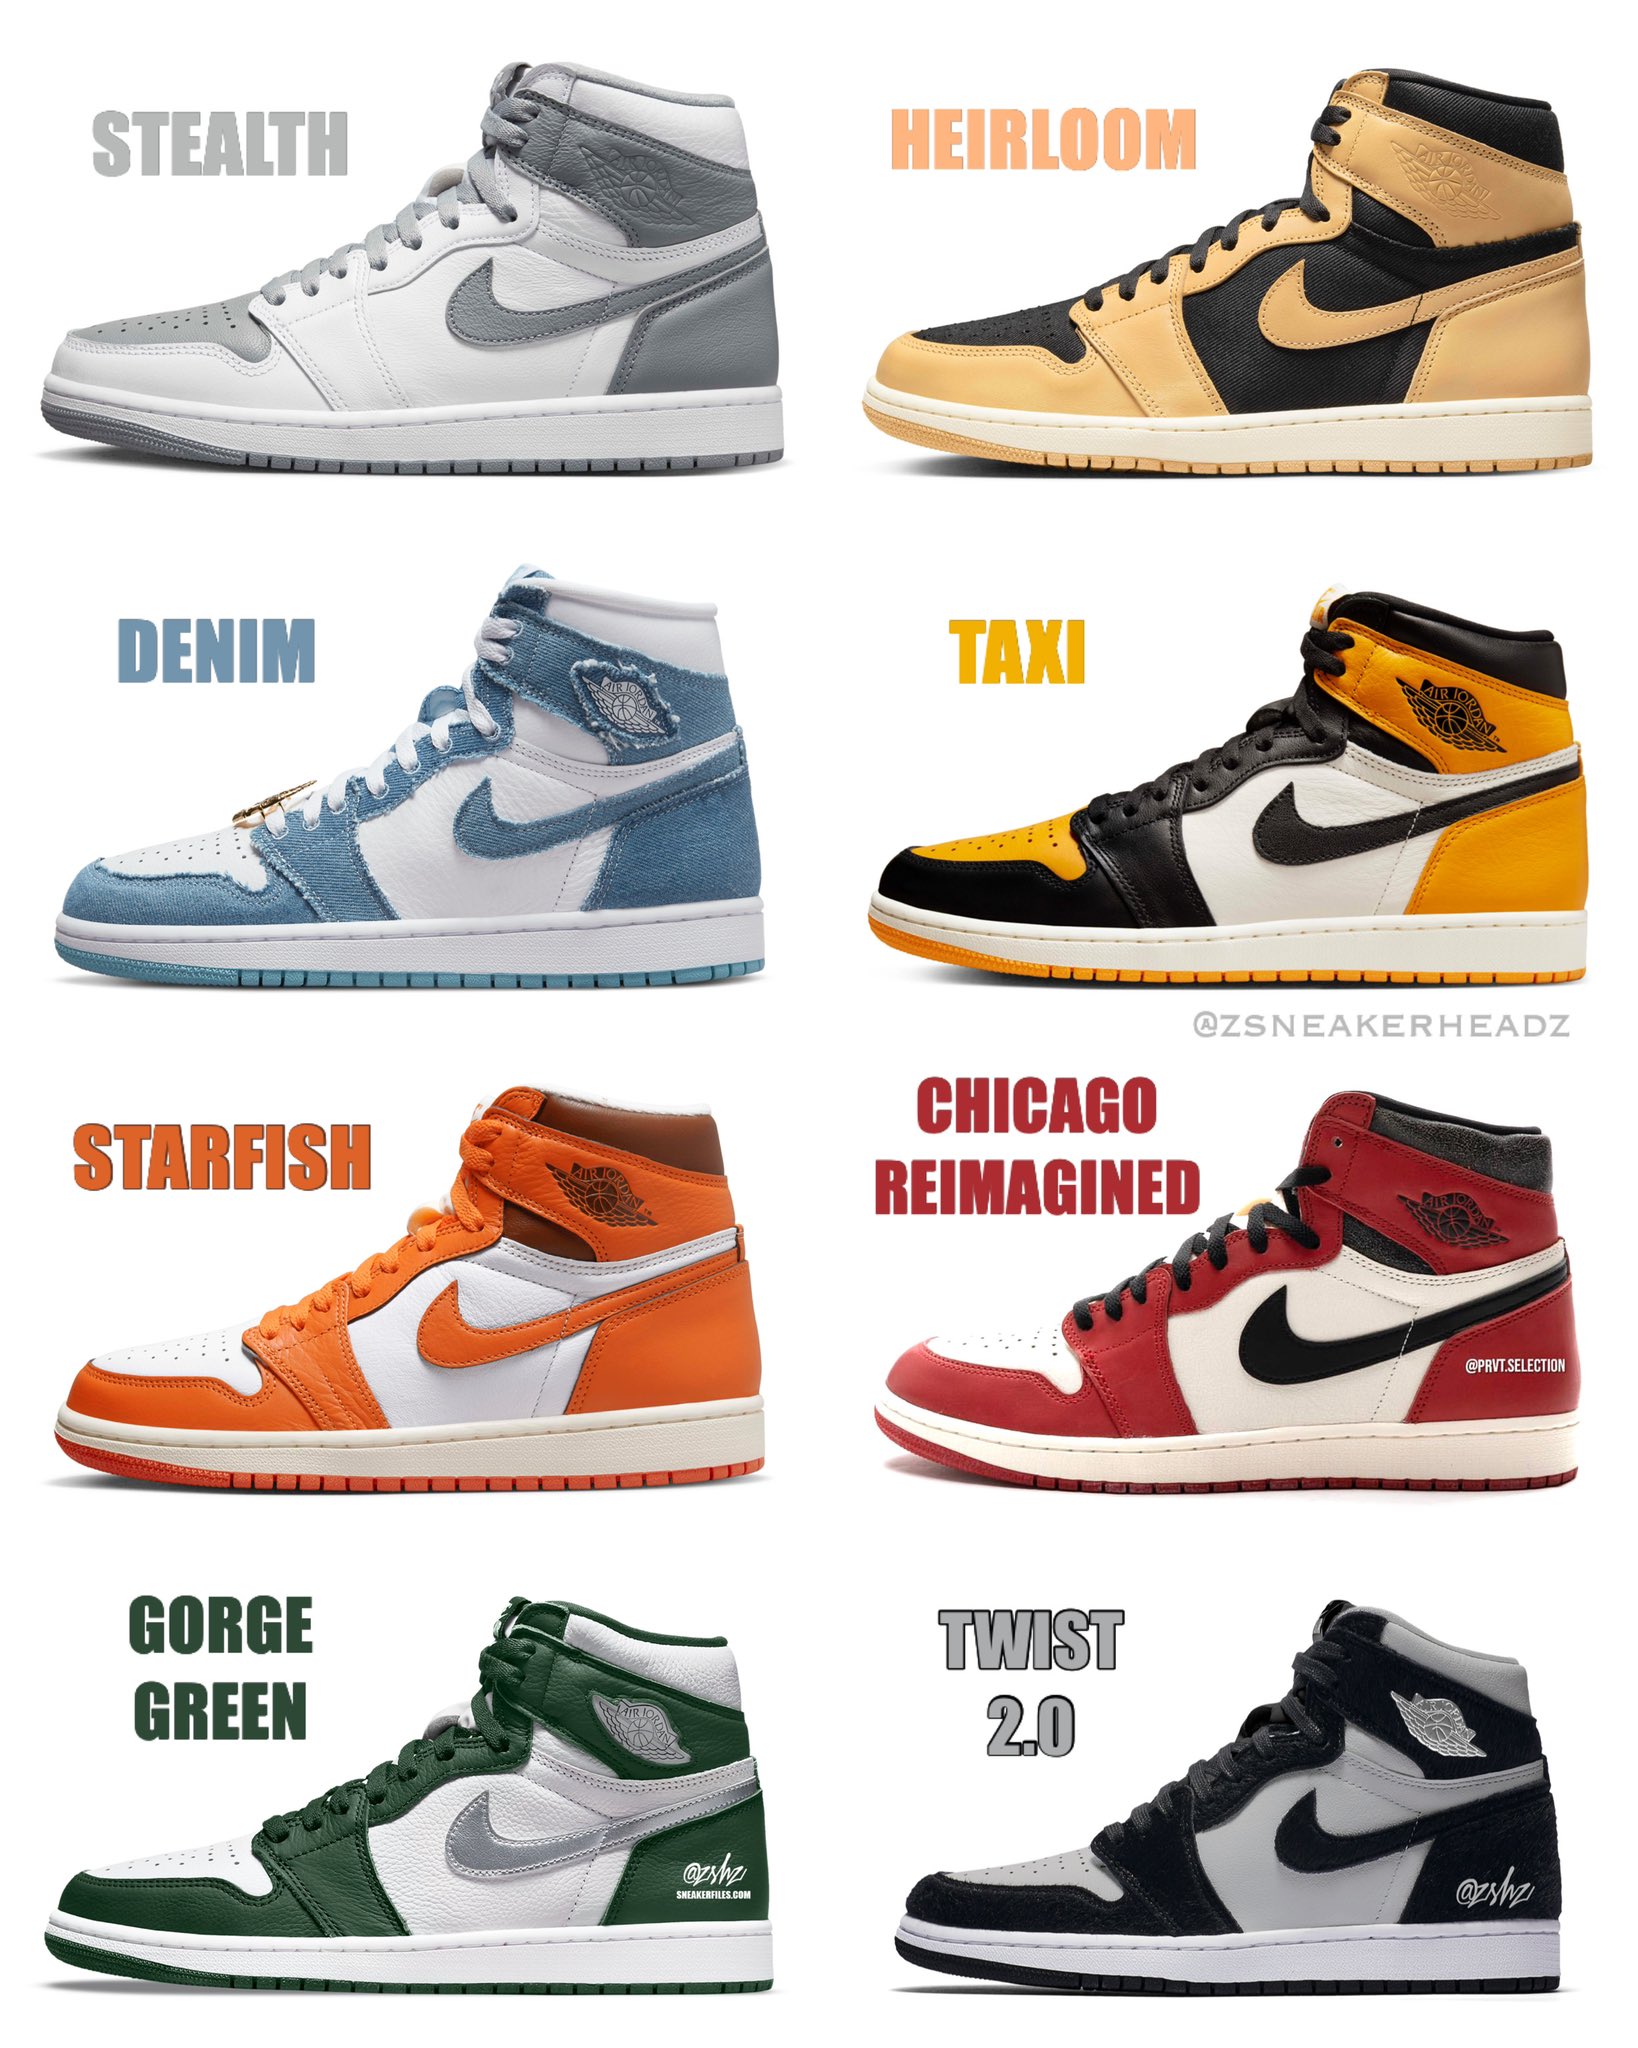 samtale kompensere banjo zSneakerHeadz on X: "Which upcoming Air Jordan 1 High OG colorway(s) will  you be going after⁉️🤔 https://t.co/SGc6aZipYx" / X